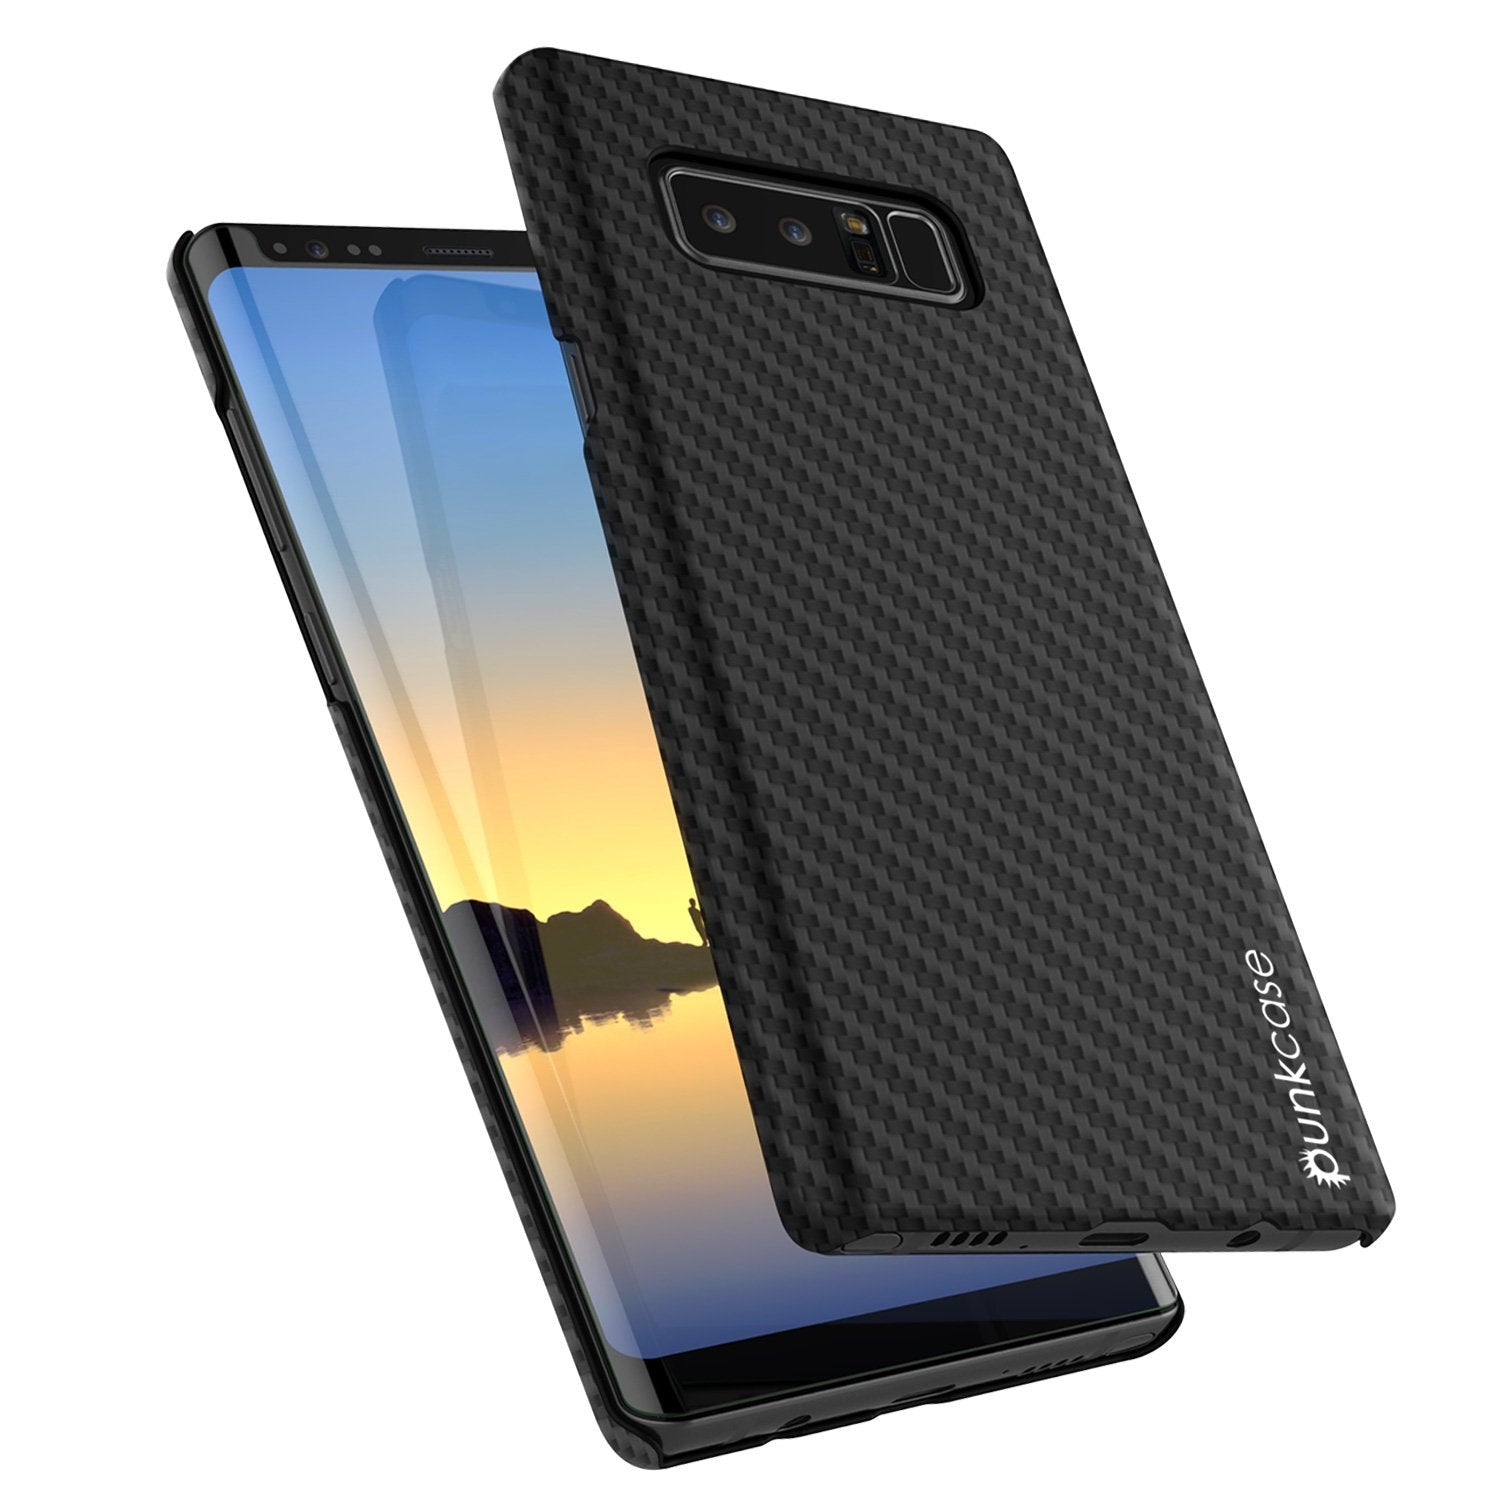 Galaxy Note 8 Case, Punkcase CarbonShield, Heavy Duty & Ultra Thin 2 Piece Dual Layer PU Leather Cover with PUNKSHIELD Screen Protector [jet black]